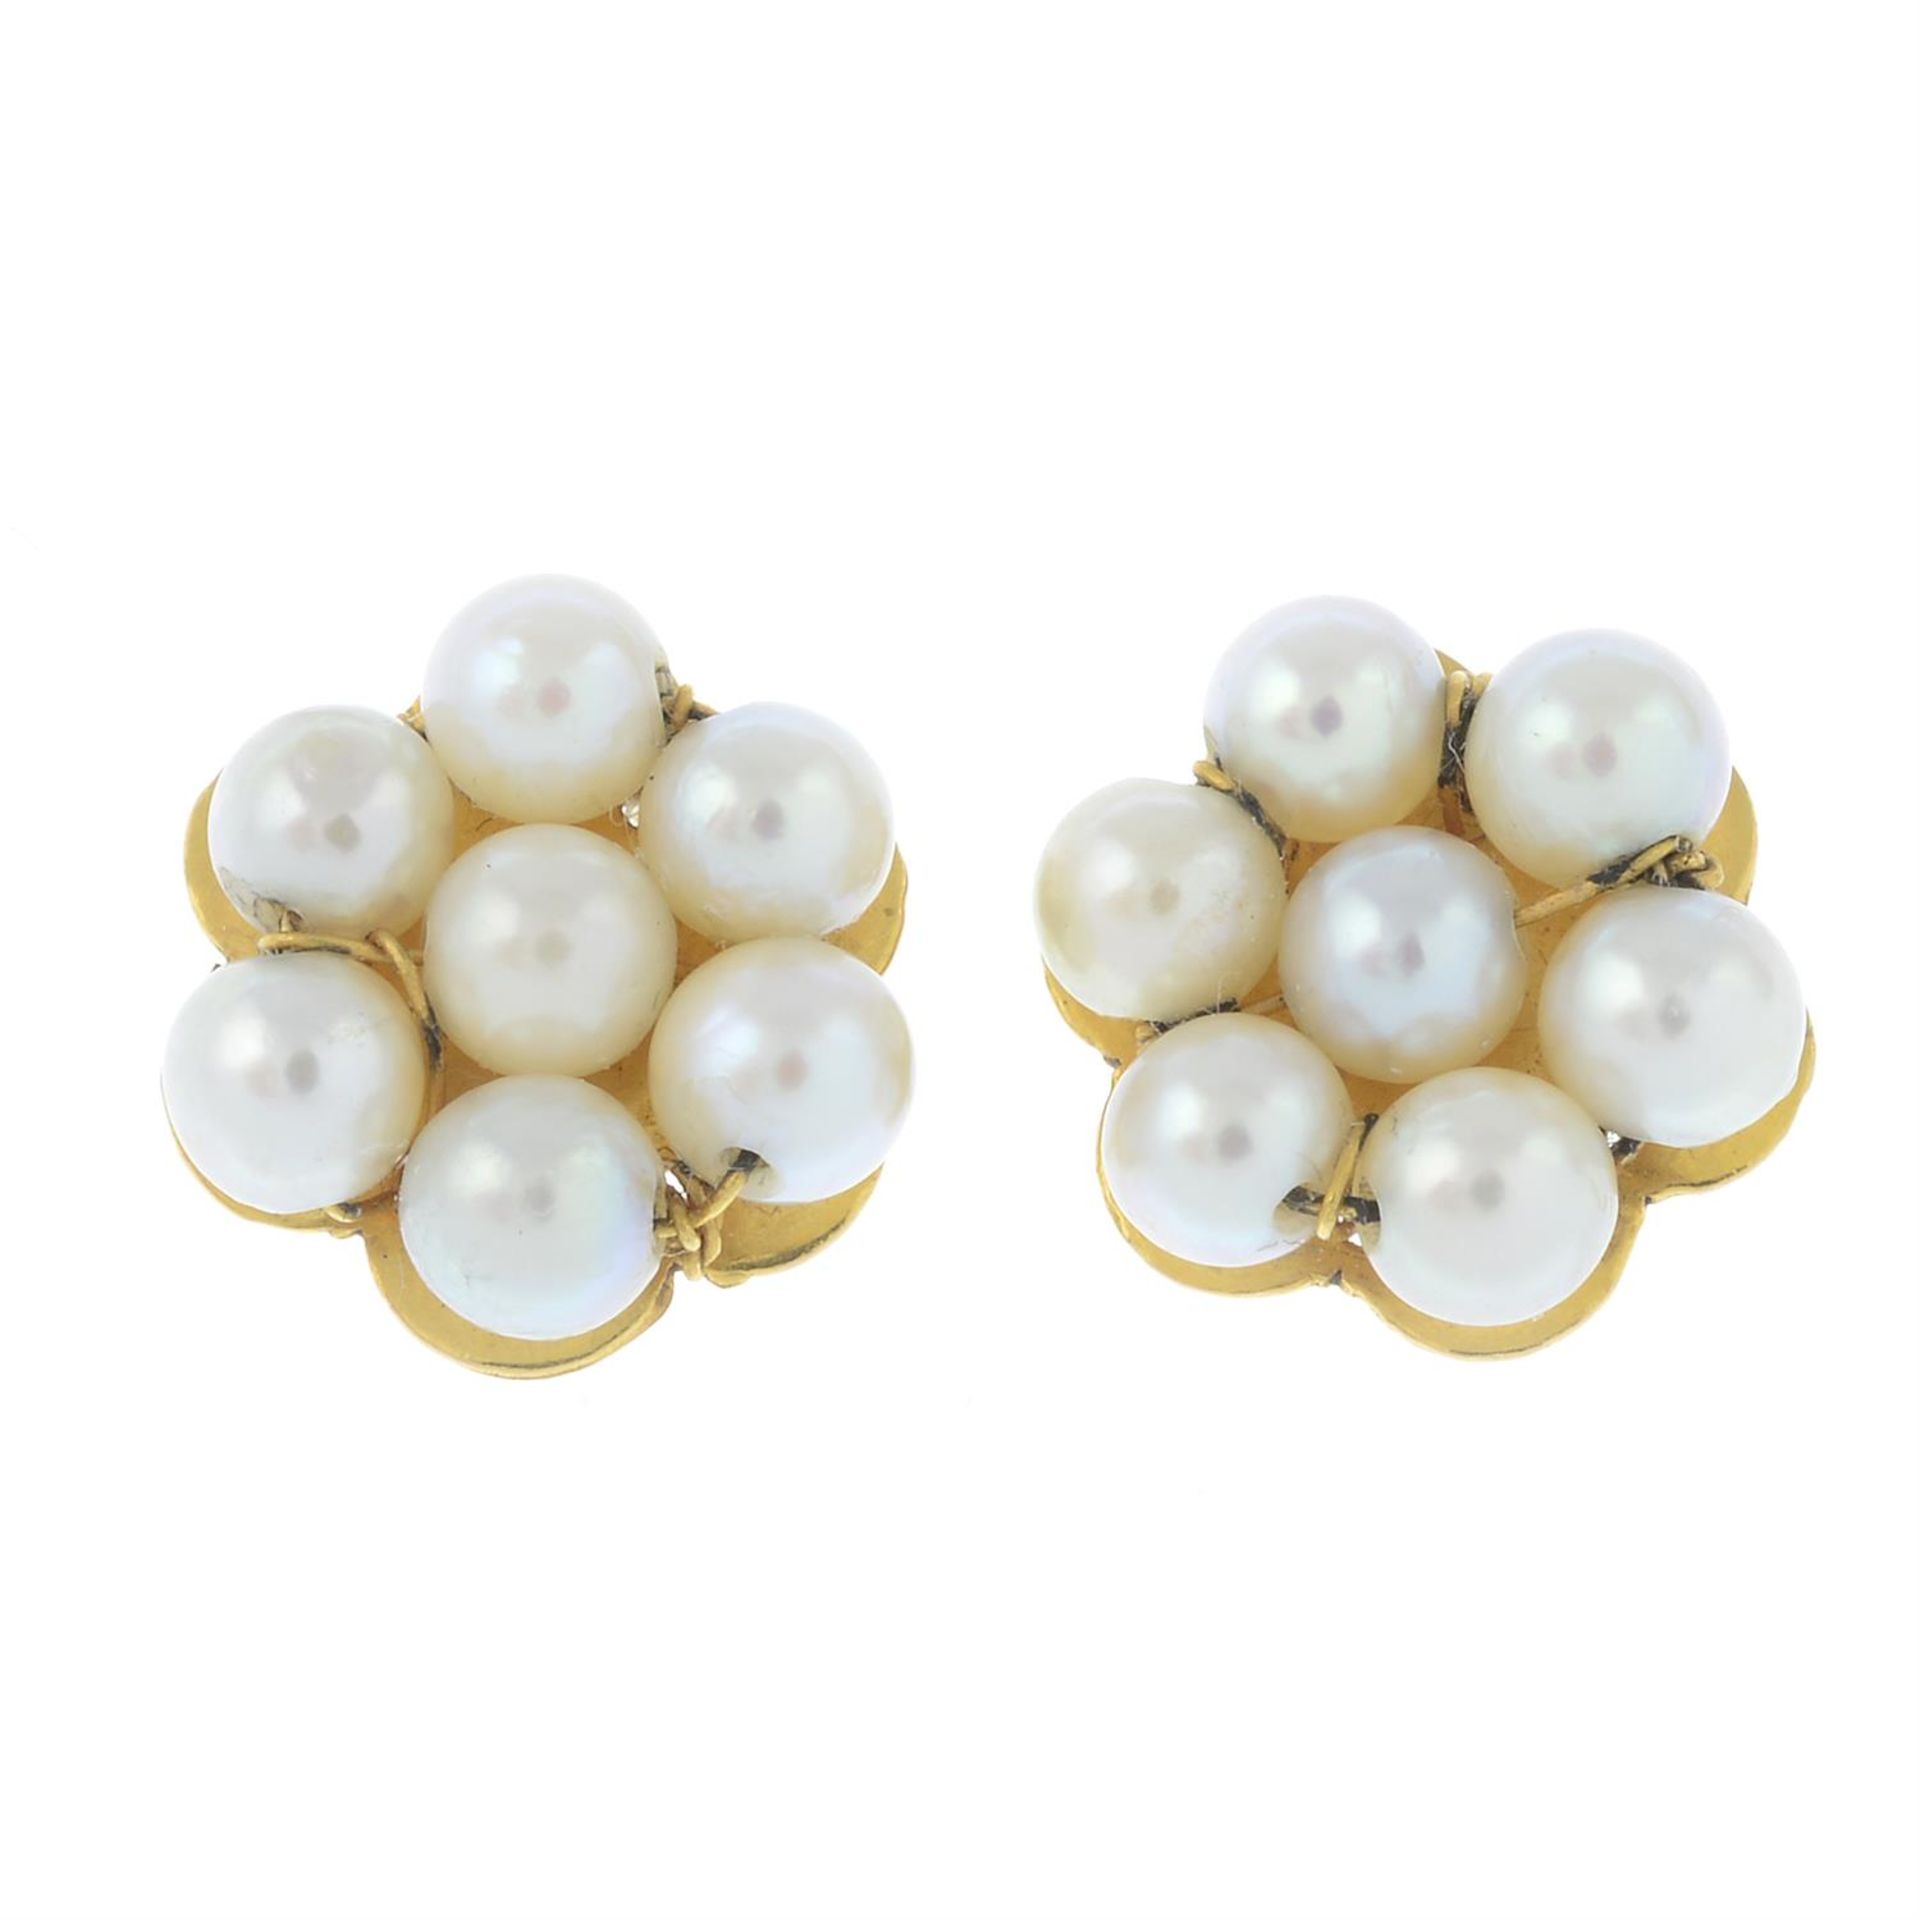 A pair of cultured pearl cluster earrings.